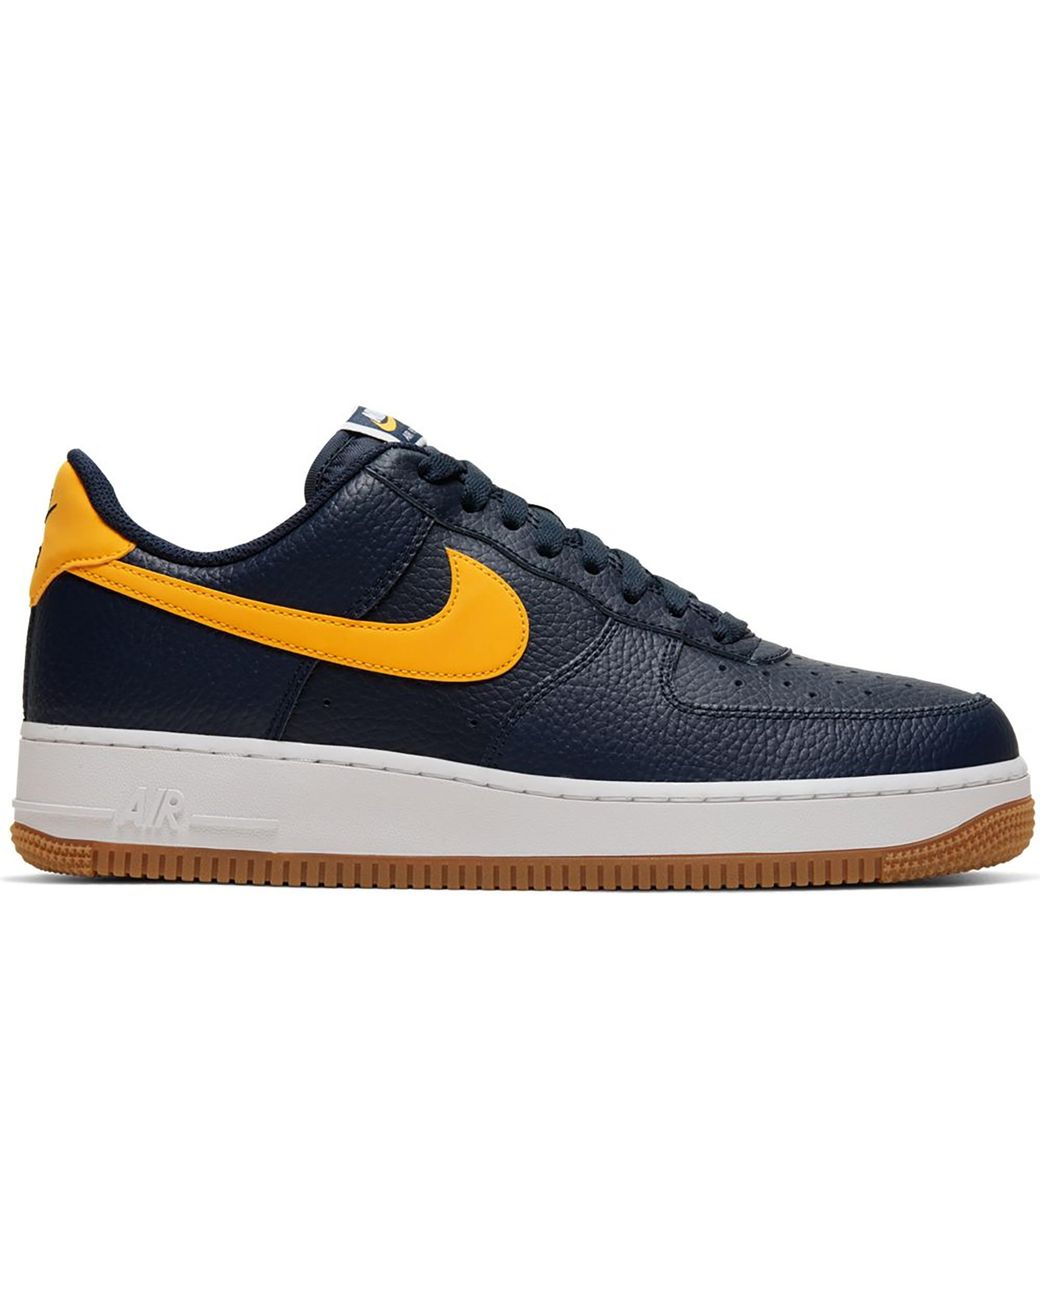 Nike Air Force 1 Low Michigan in Blue for Men - Lyst